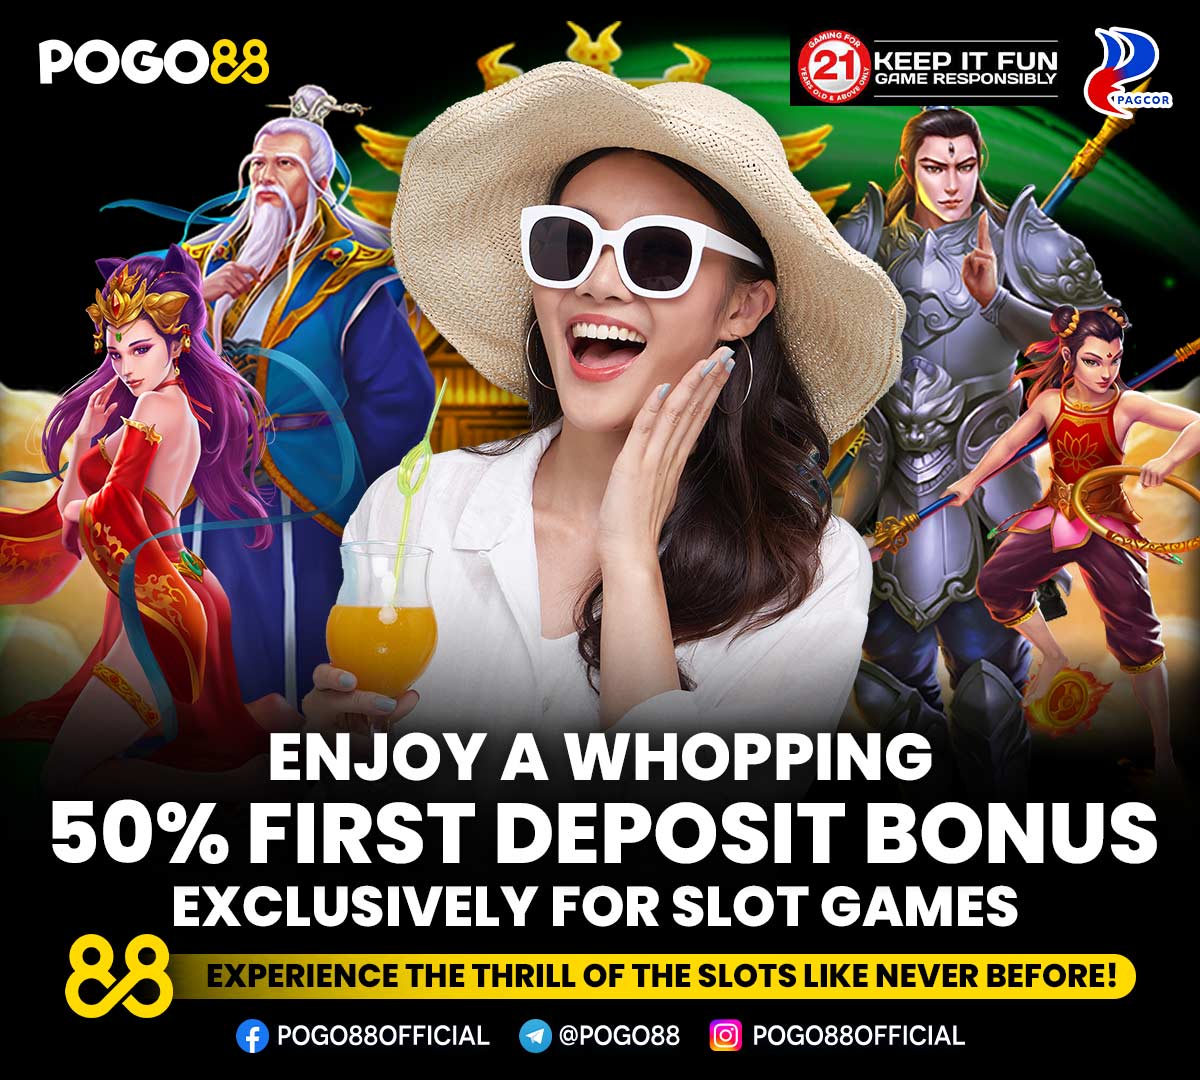 Experience the thrill of the slots like never before! Dive into the excitement and boost your chances of hitting those big wins from the very start
#POGO88 #slotgames #RegisterNow